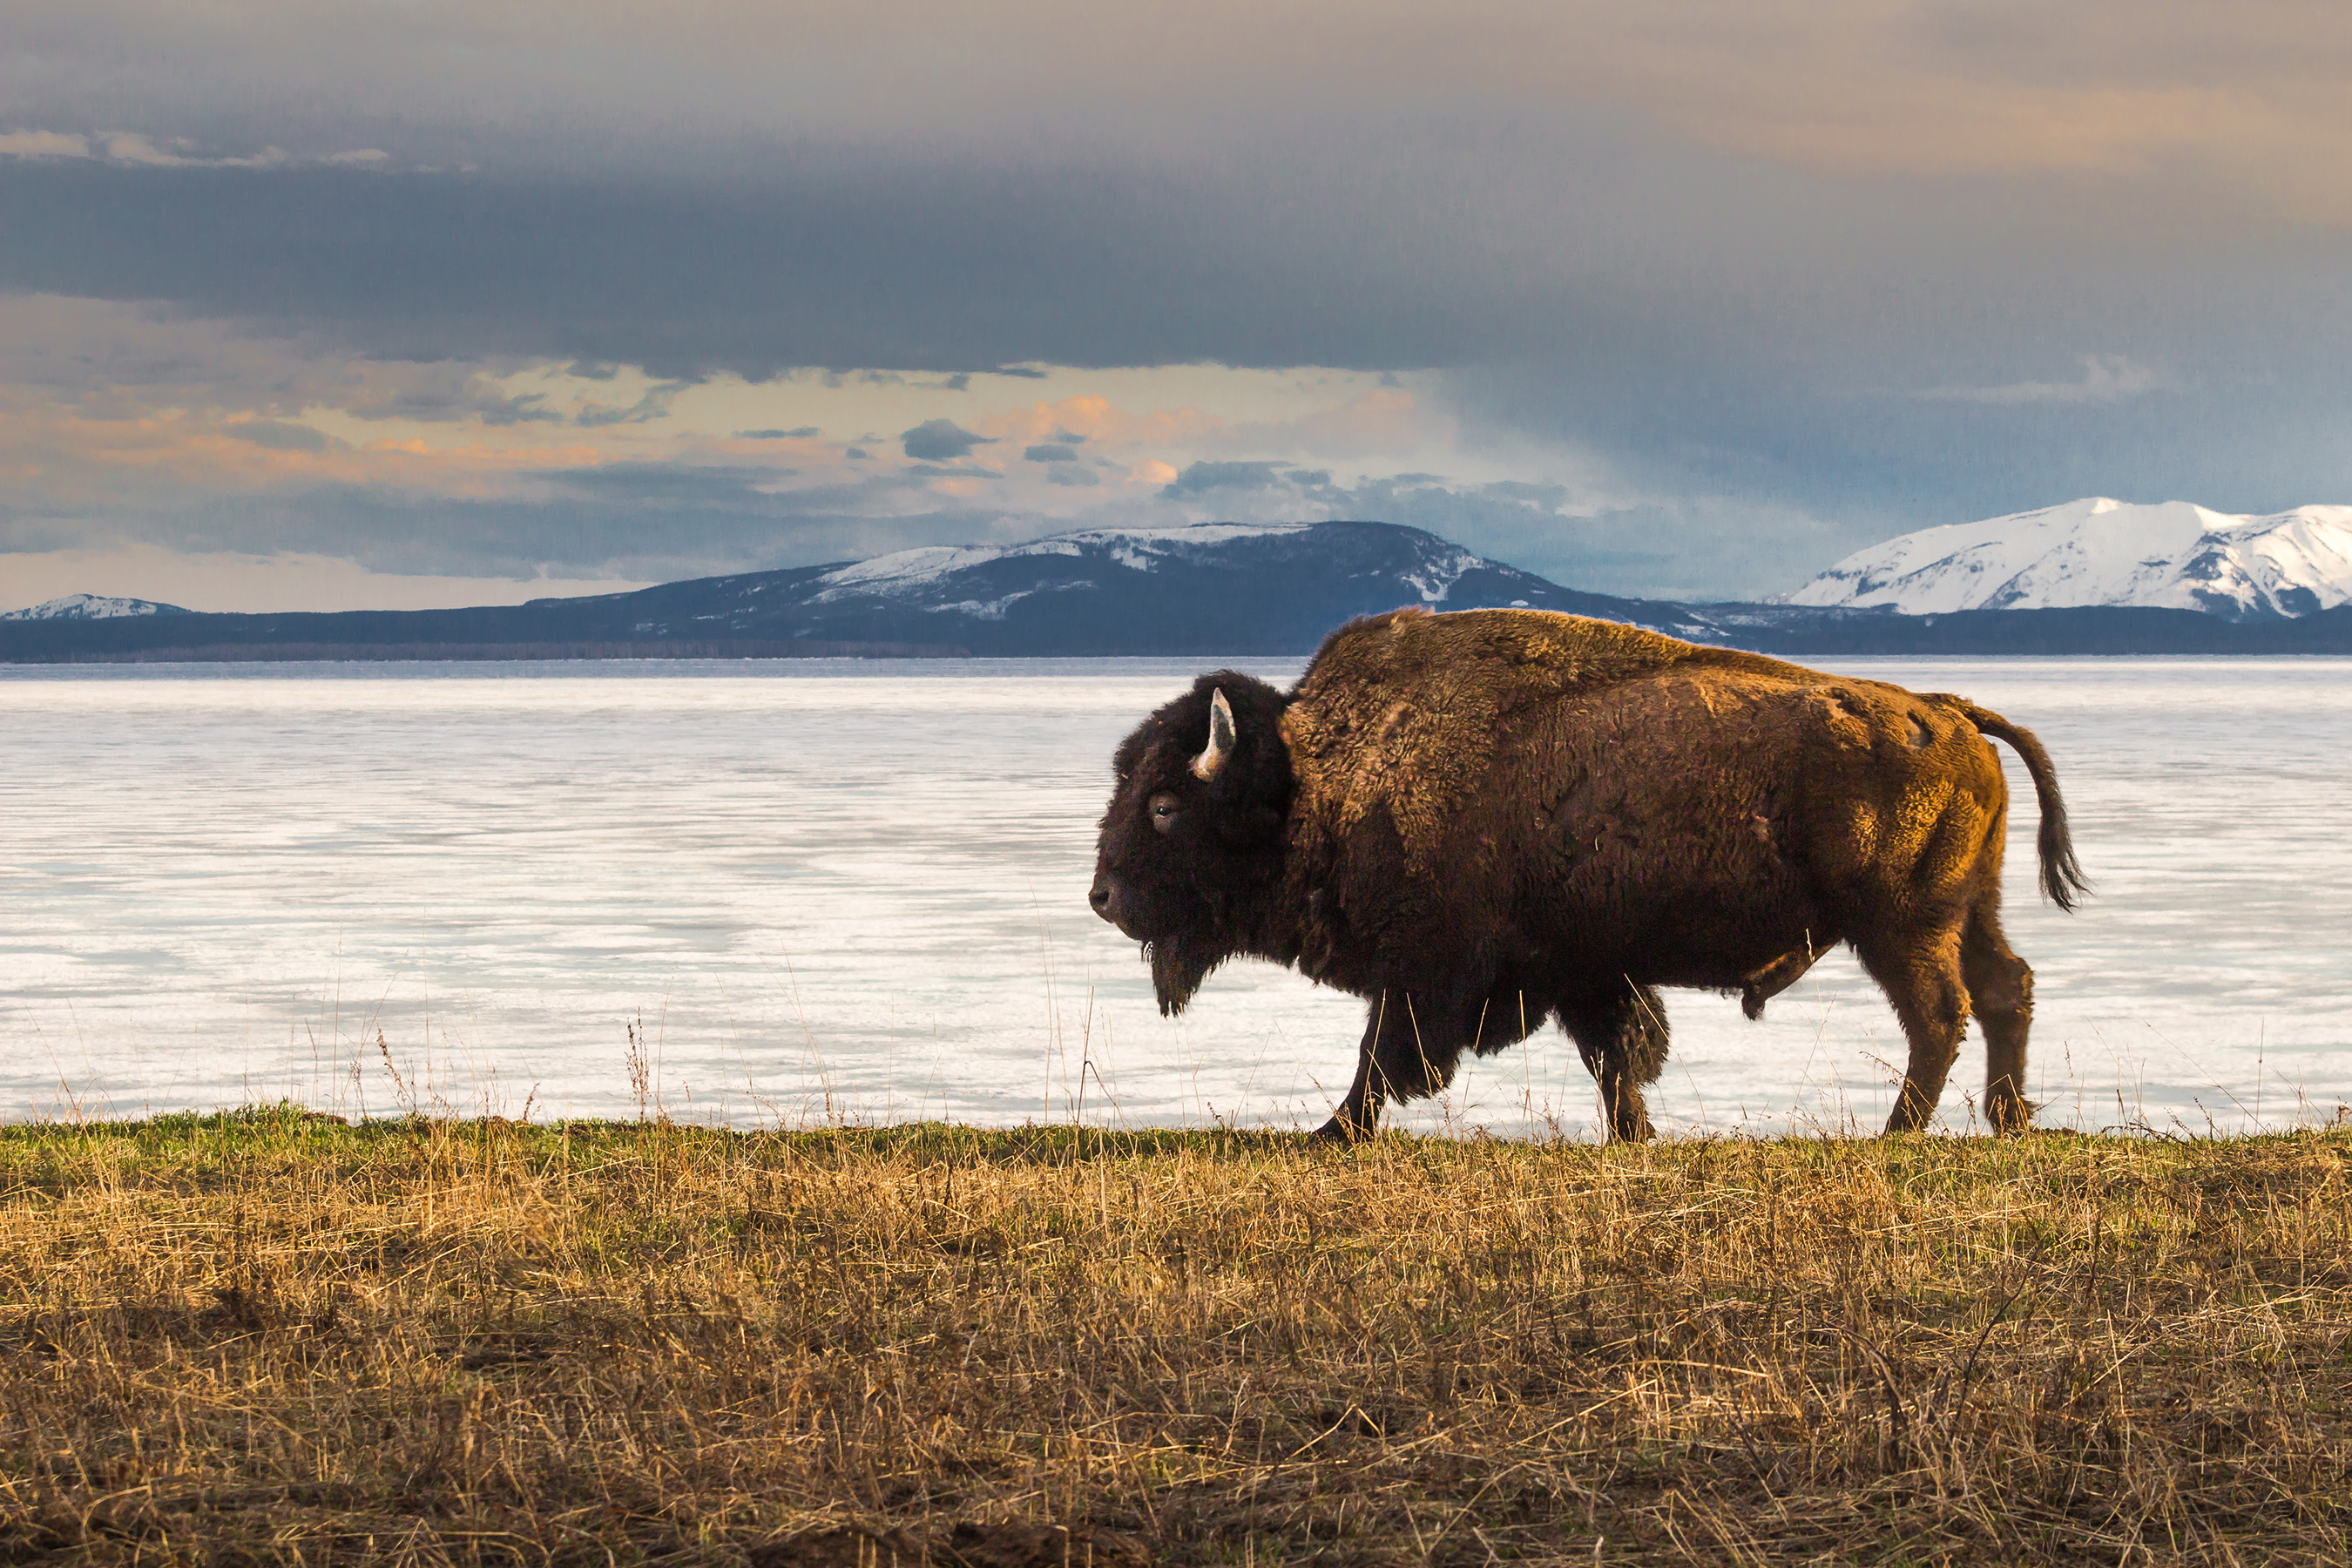 Yellowstone National Park, Jordan Moore, Share the Experience 2014 photo contest